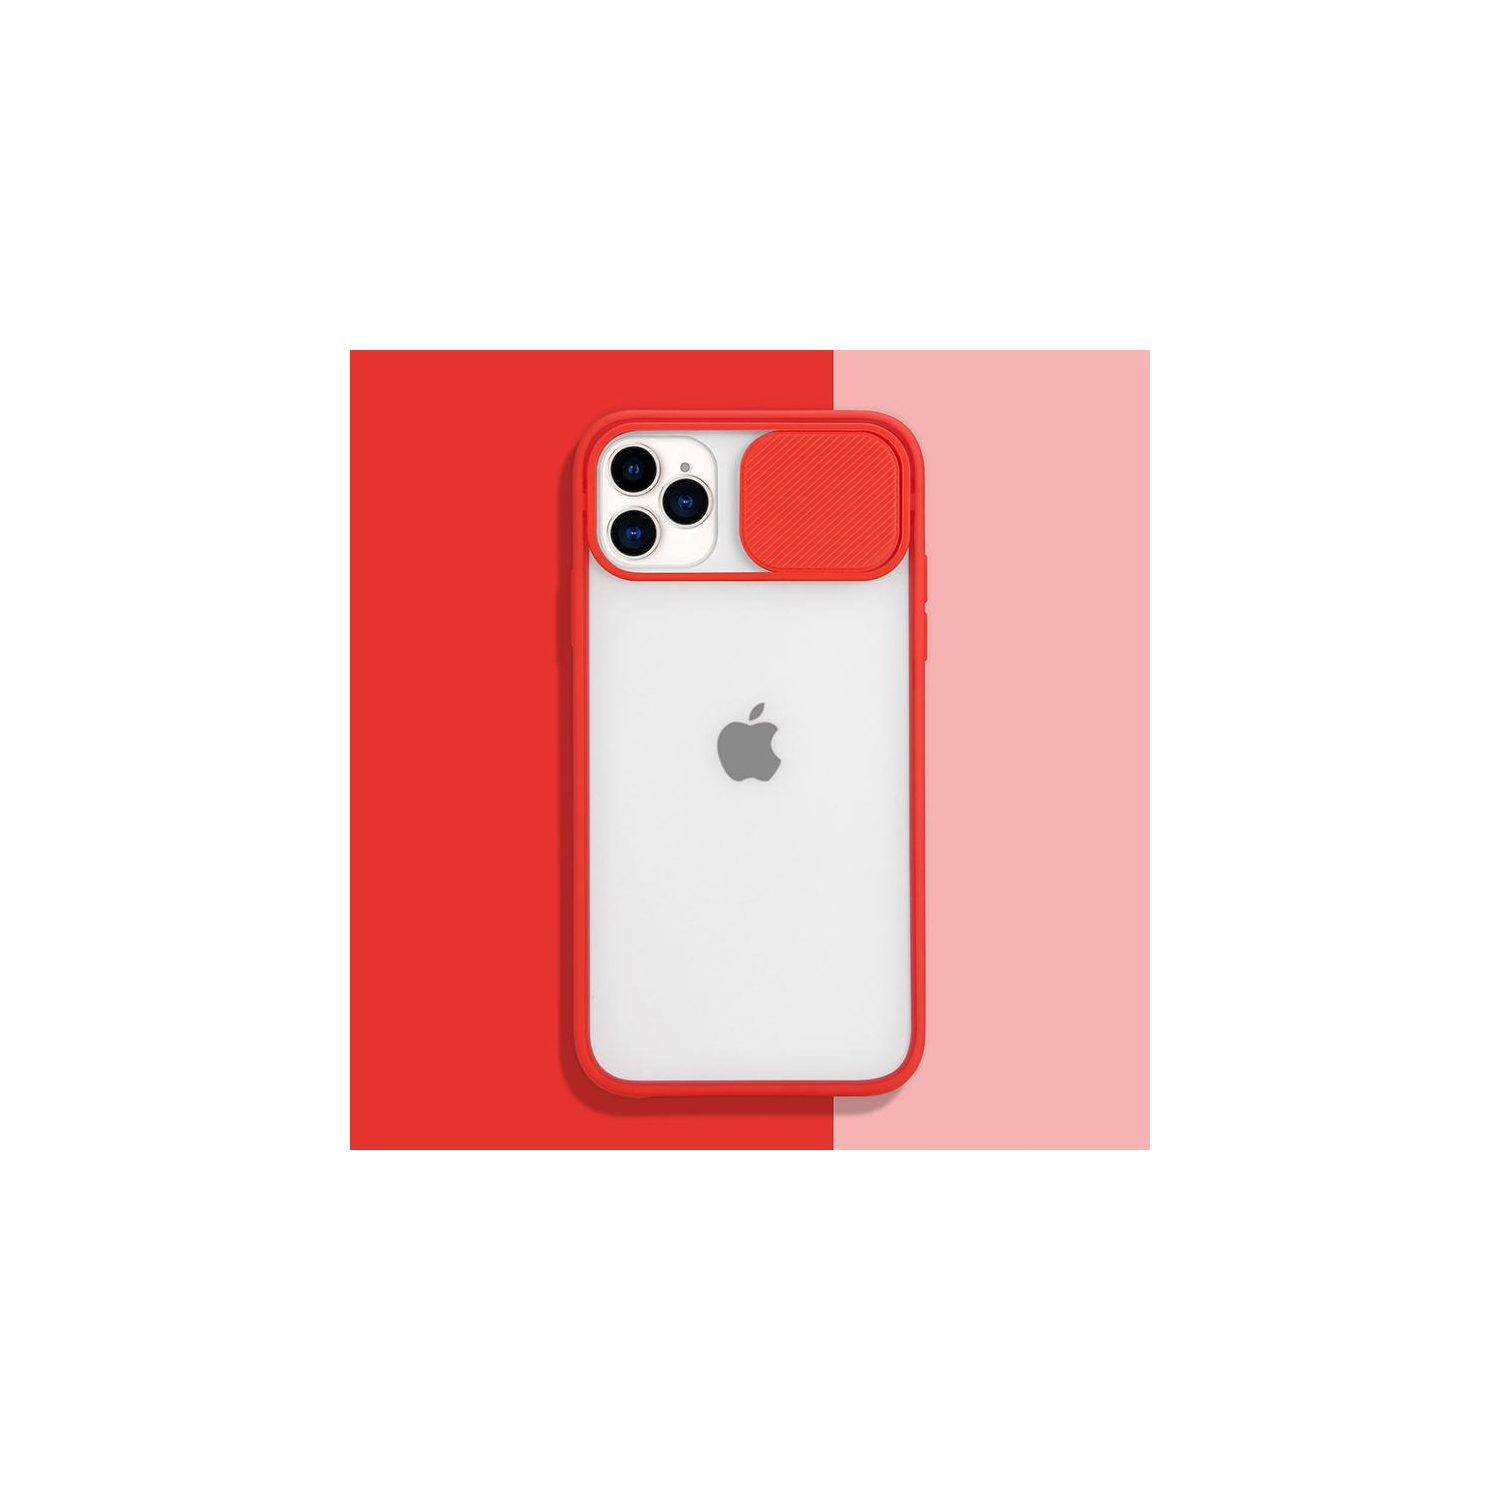 PANDACO Red Slide Clear Case for iPhone 11 Pro Max